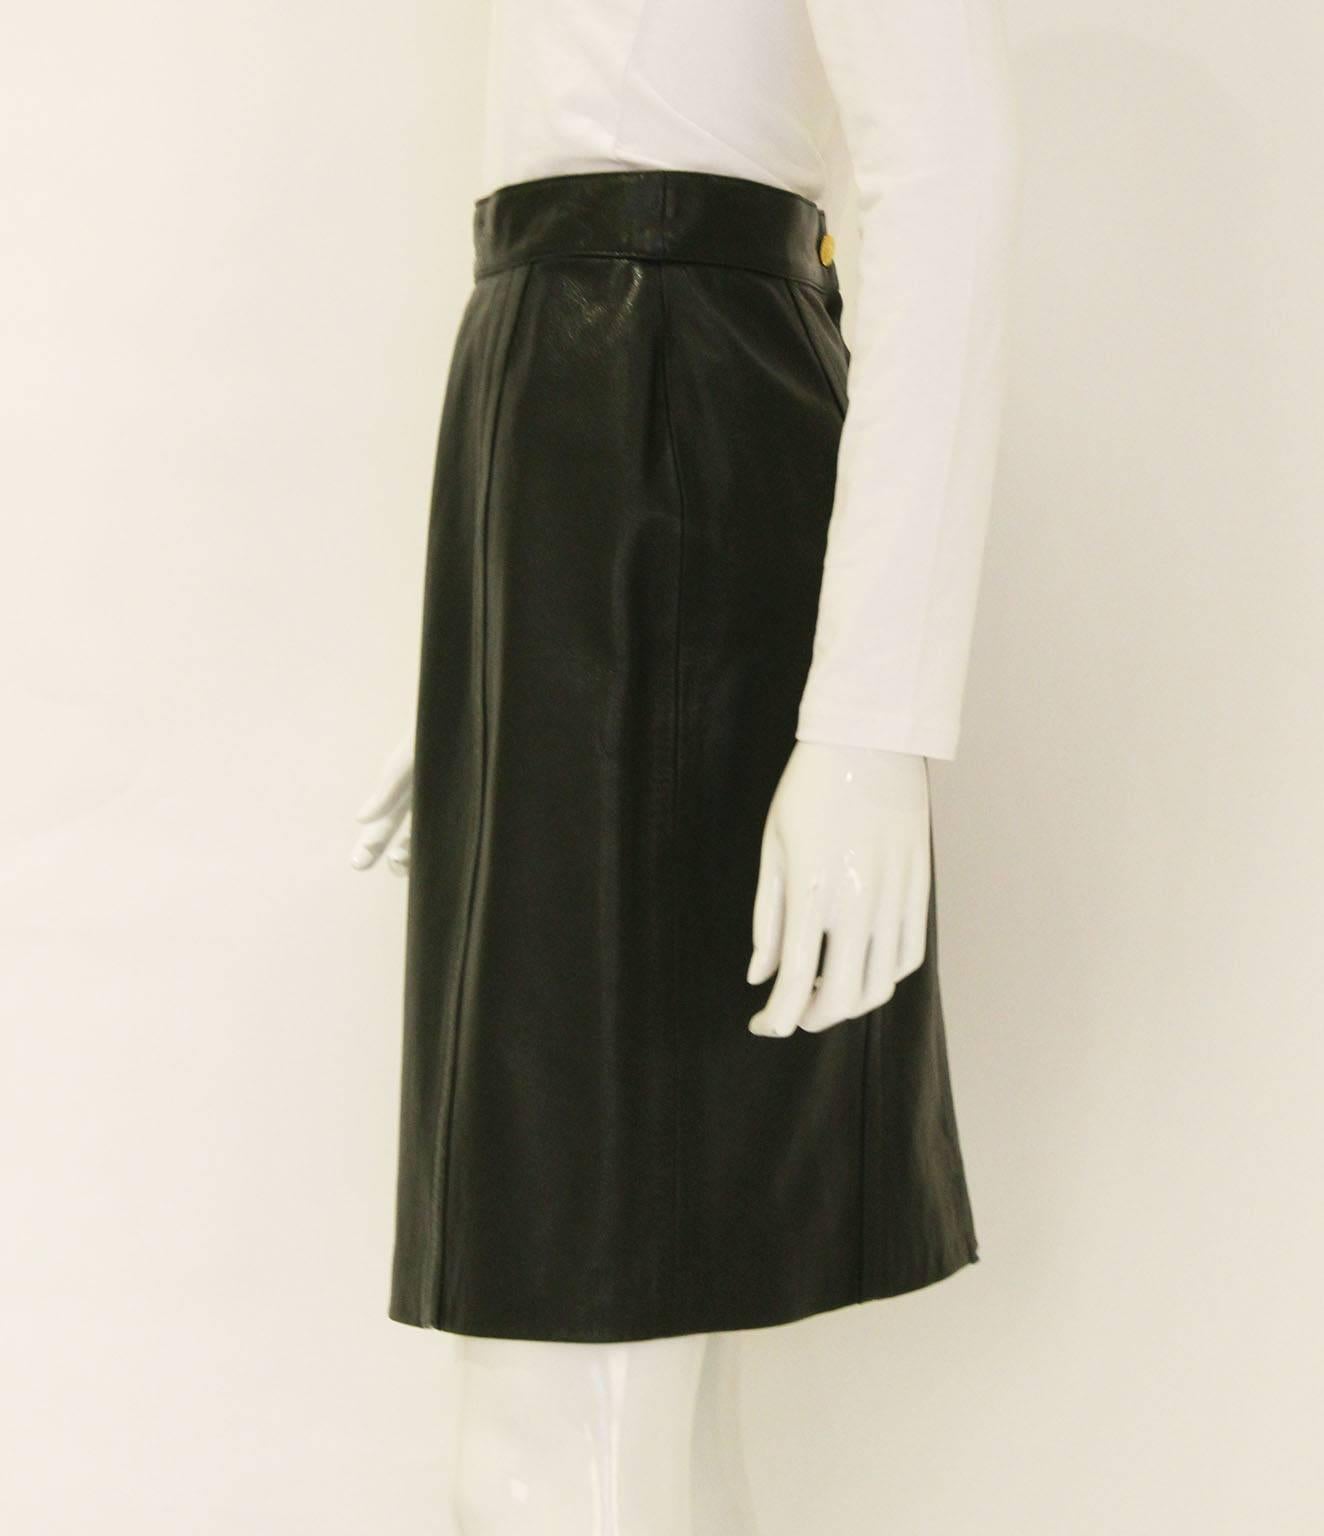 This is a wonderful skirt from French style house Celine. As you would expect from Celine , the leather is of a high quality, and super soft. There is a central back zip, and two rows of vertical stitching on the front and back. The skirt is fully